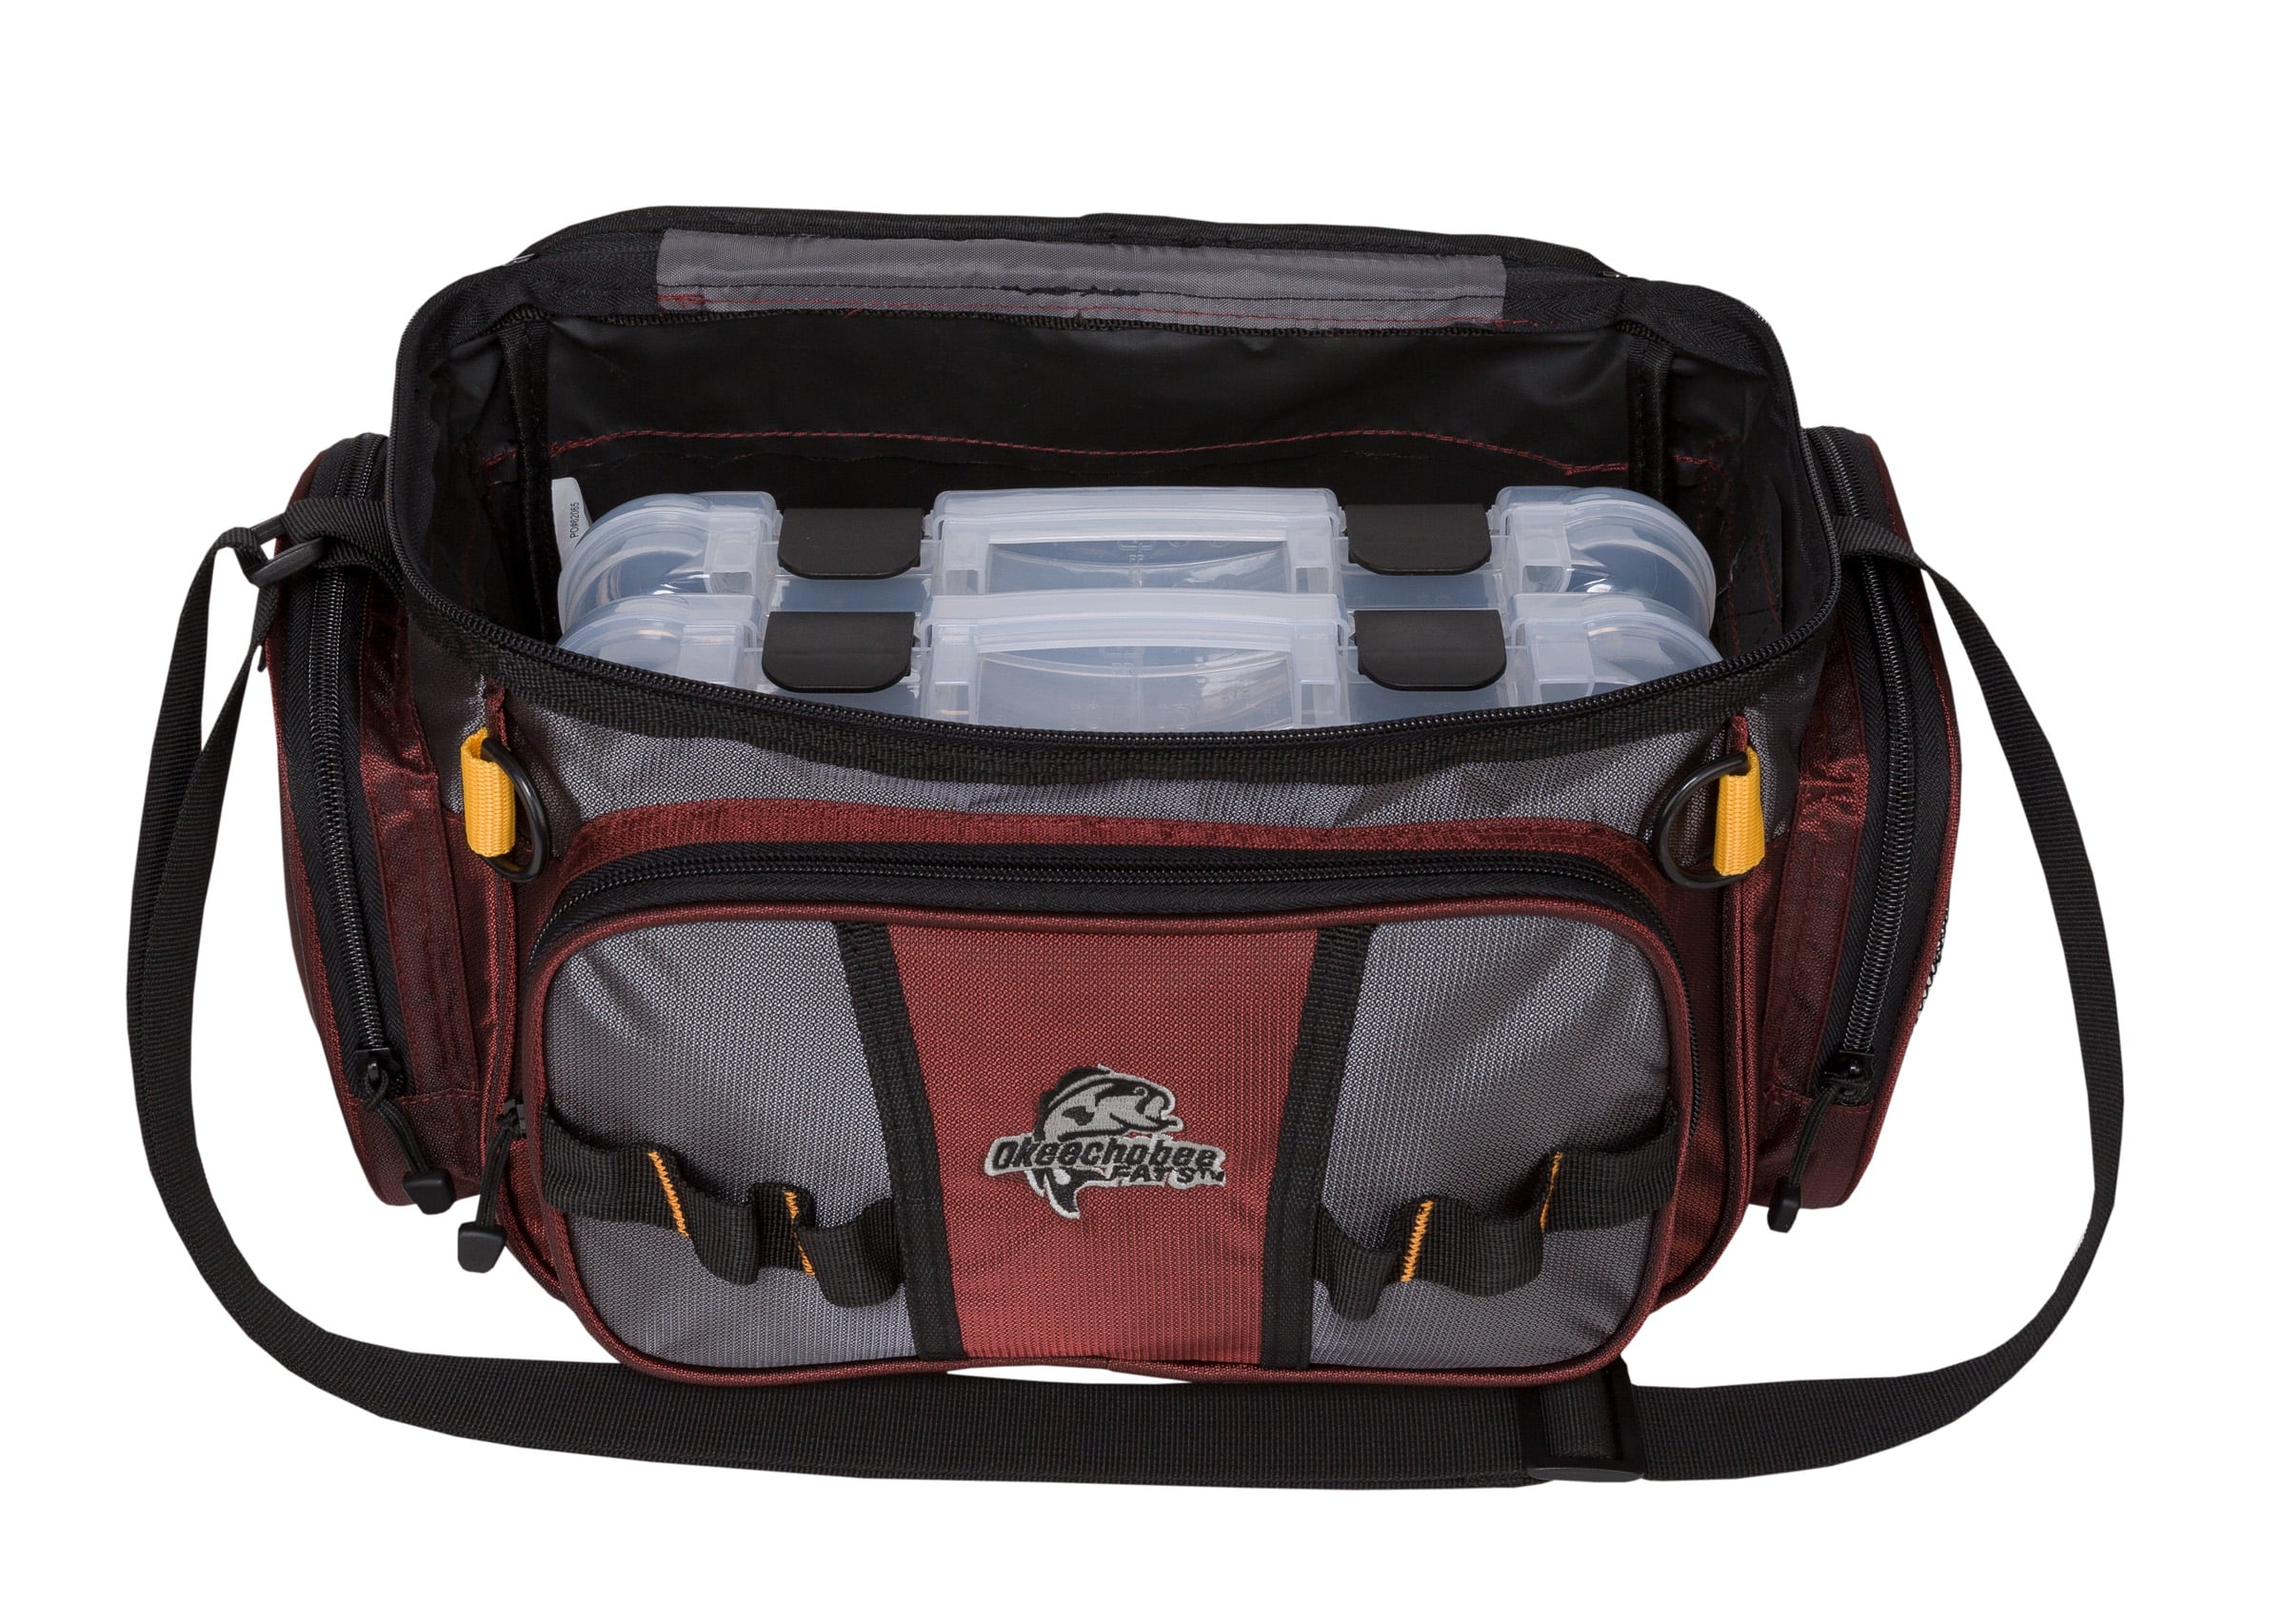 Okeechobee Fats Small Soft-Sided Fishing Tackle Bag with 2